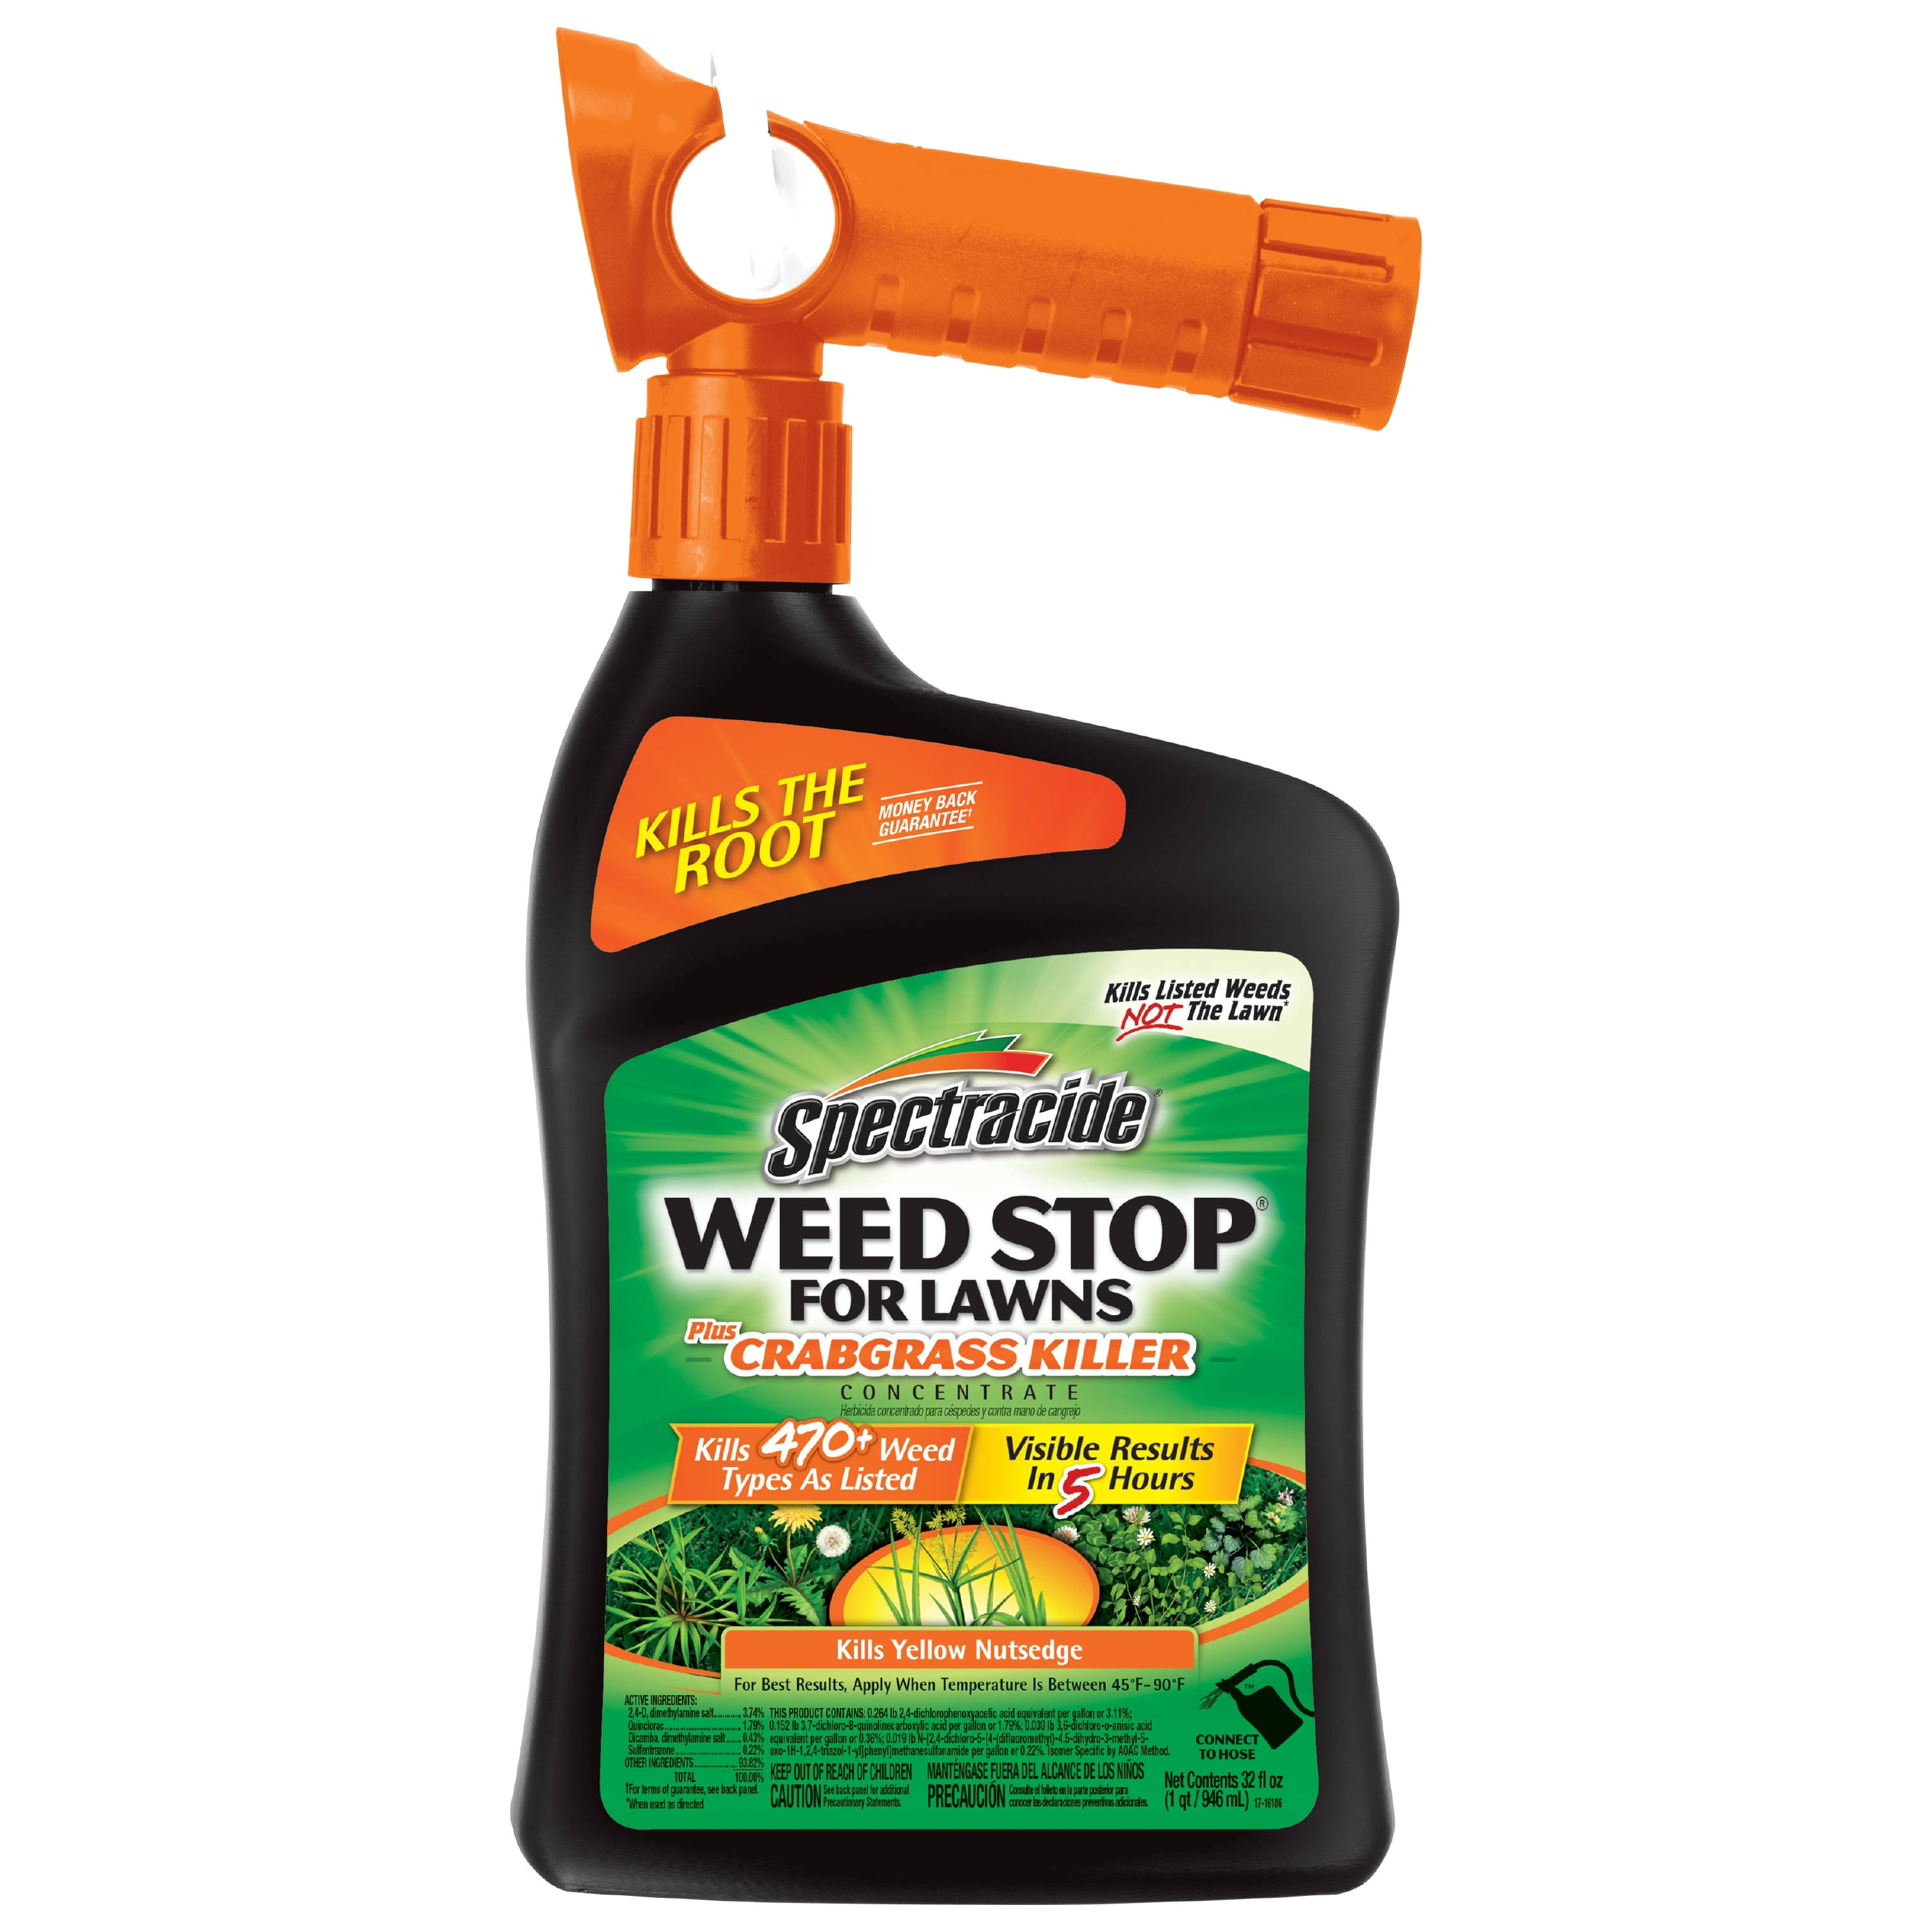 Spectracide Weed Stop, For Lawns, Plus Crabgrass Killer, Concentrate - 32 fl oz